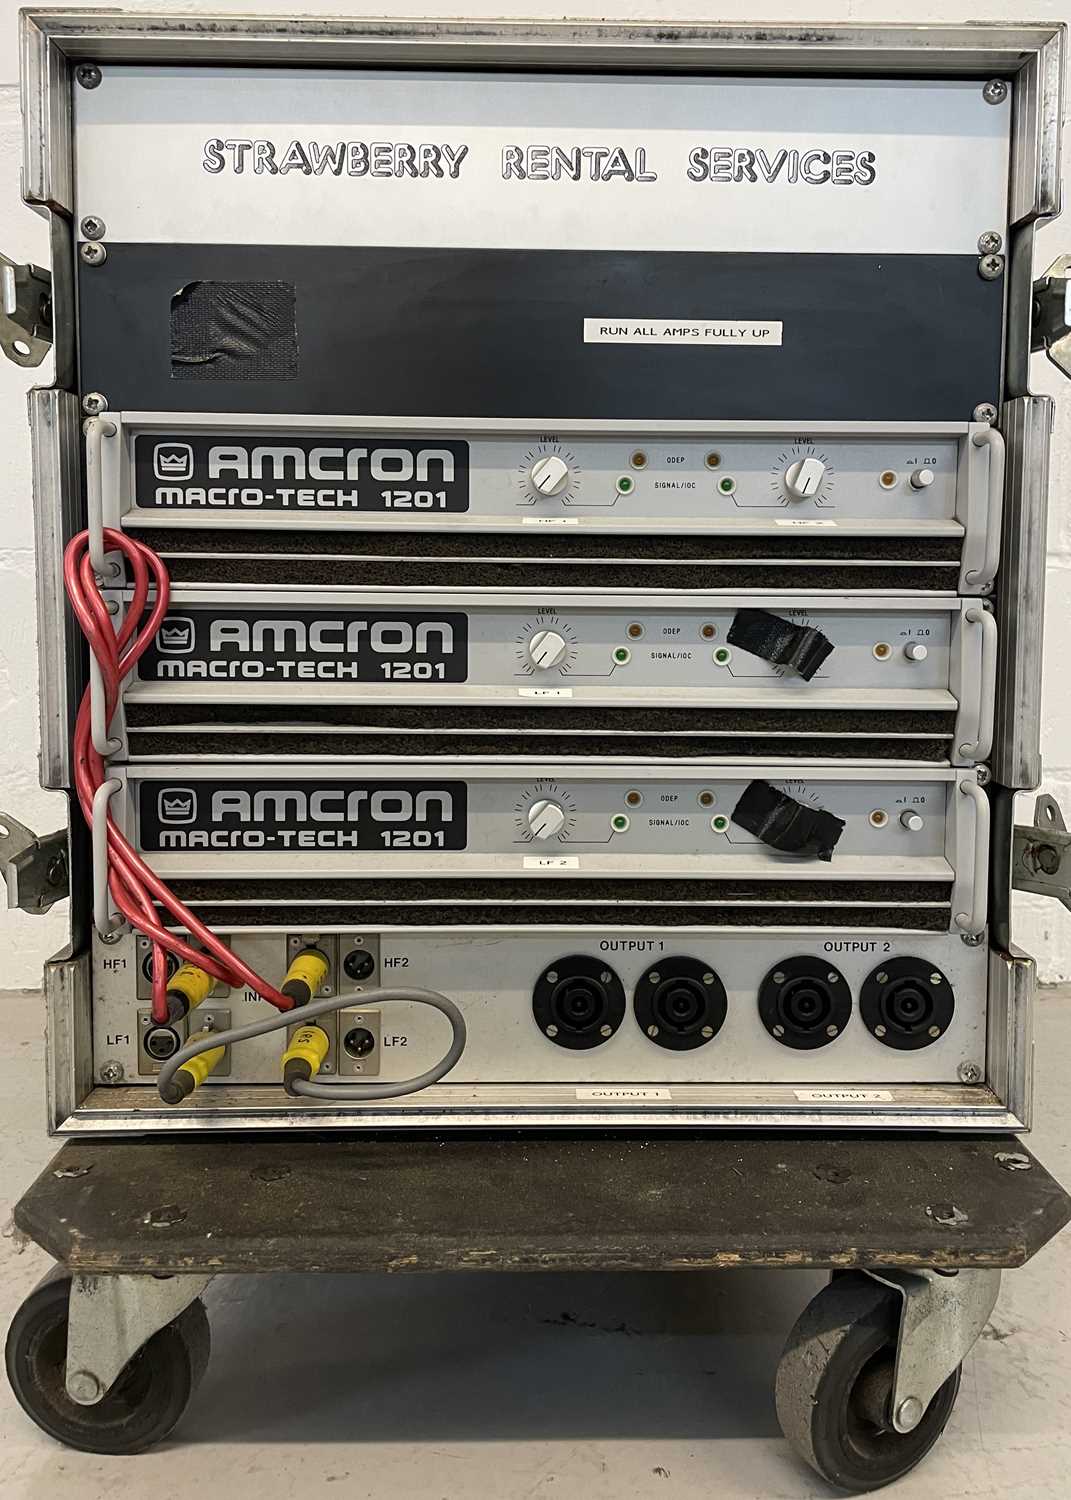 STRAWBERRY STUDIOS - STRAWBERRY RENTALS COLLECTION - FLIGHT CASE WITH AMCRON MACRO TECH 1201 AMPS.